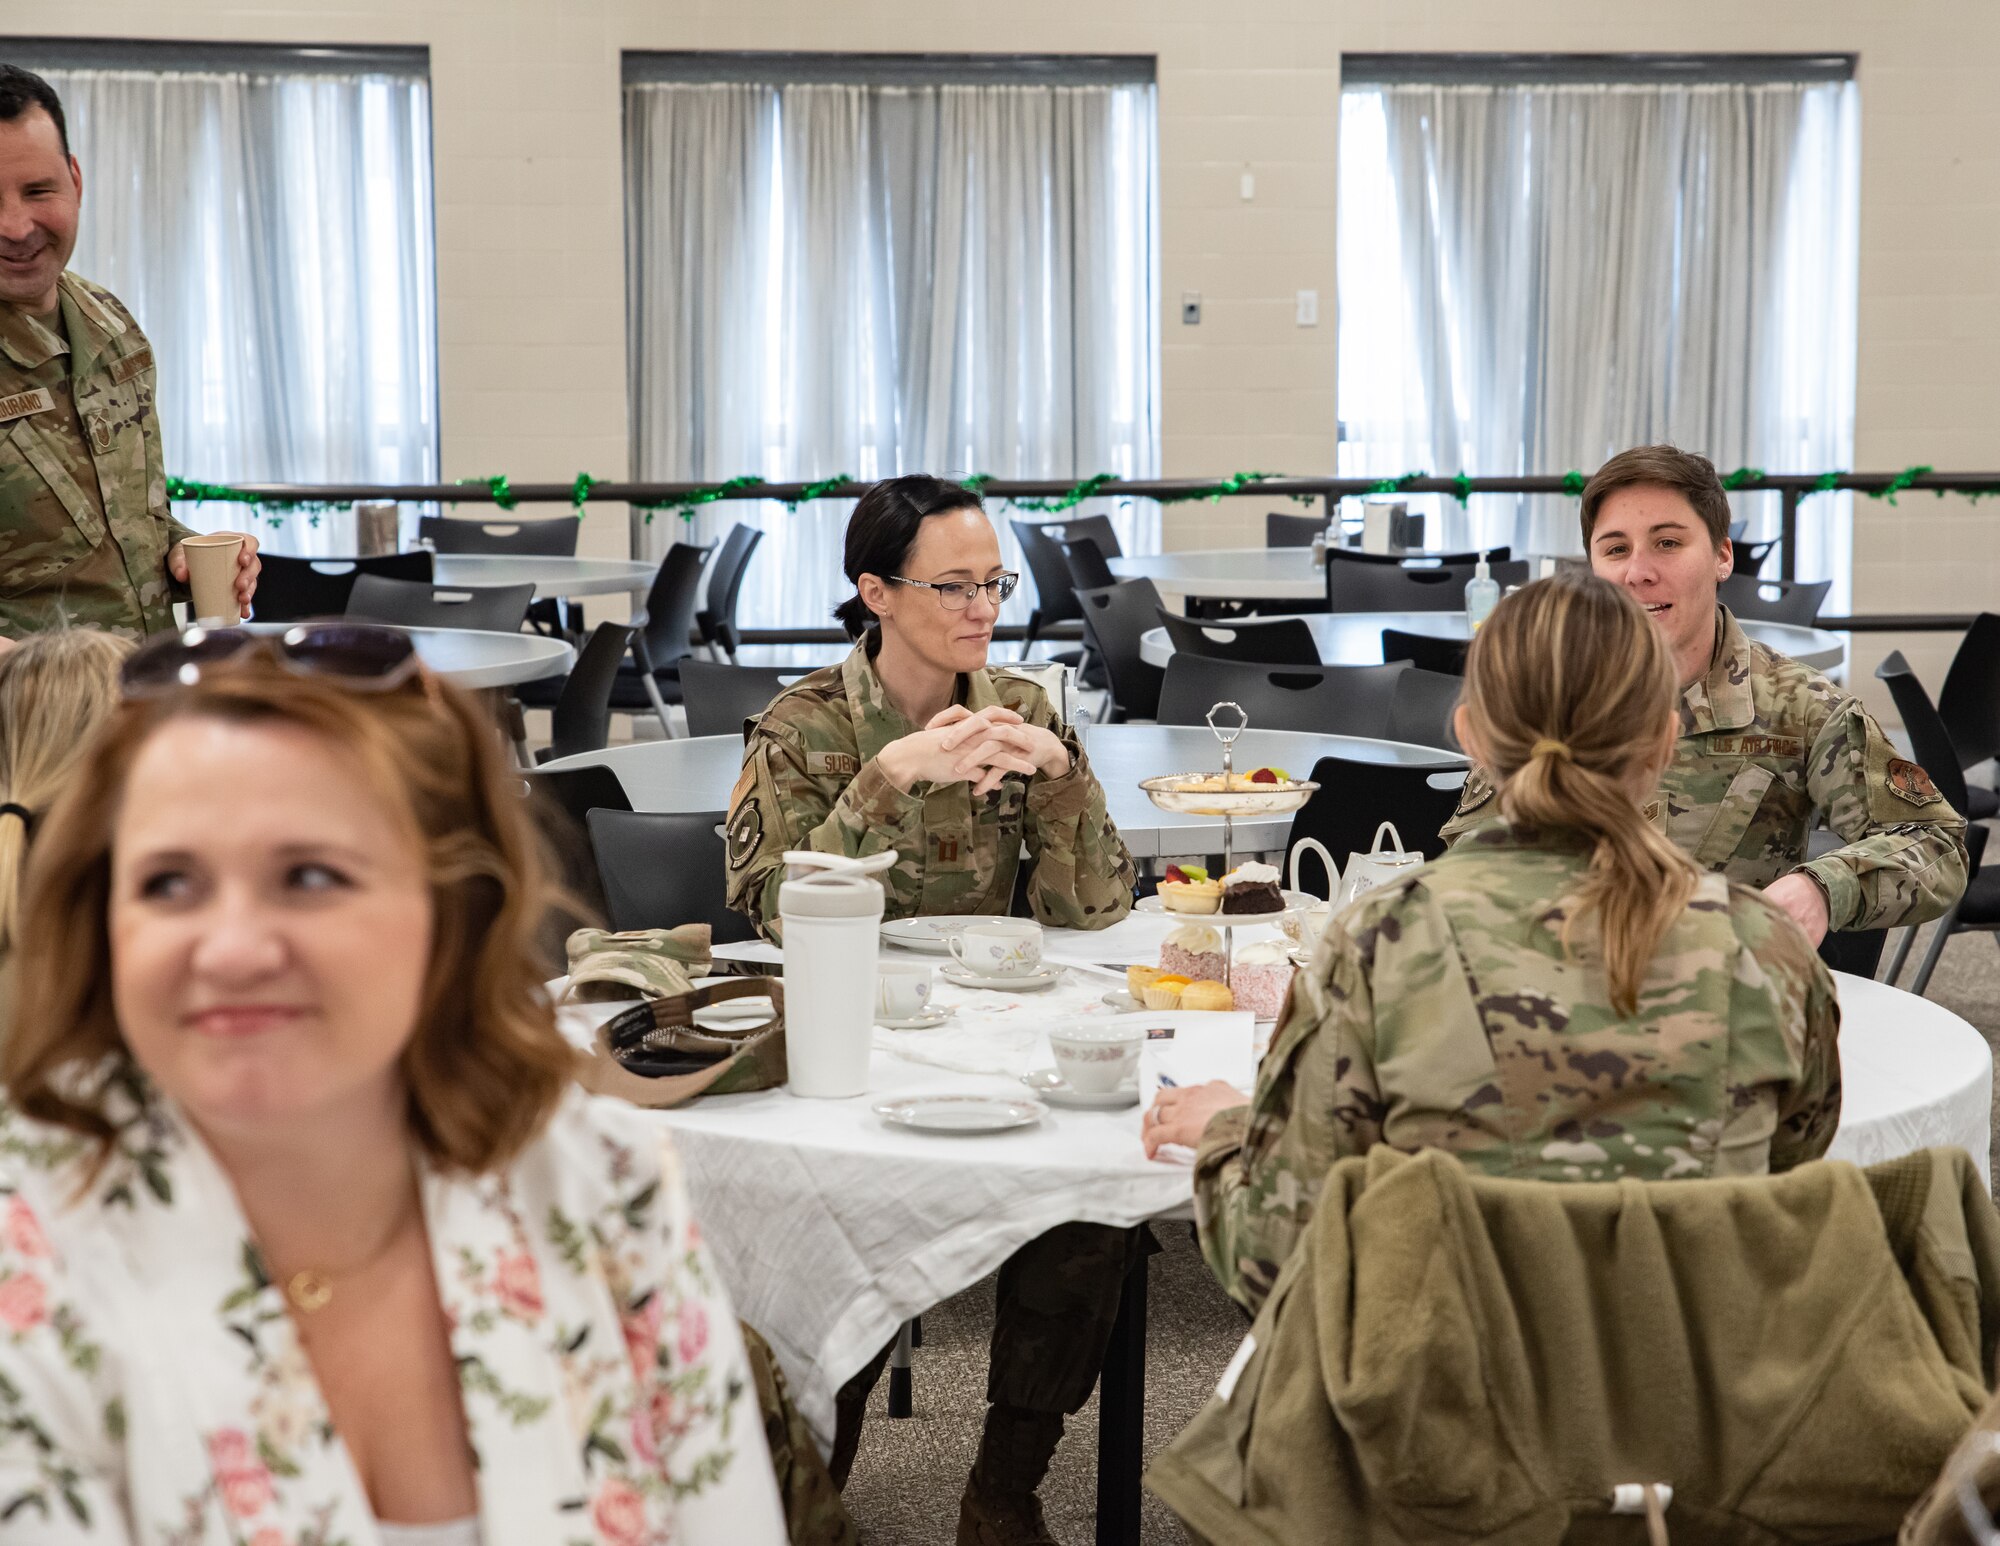 A group of women enjoy tea and snacks at a table